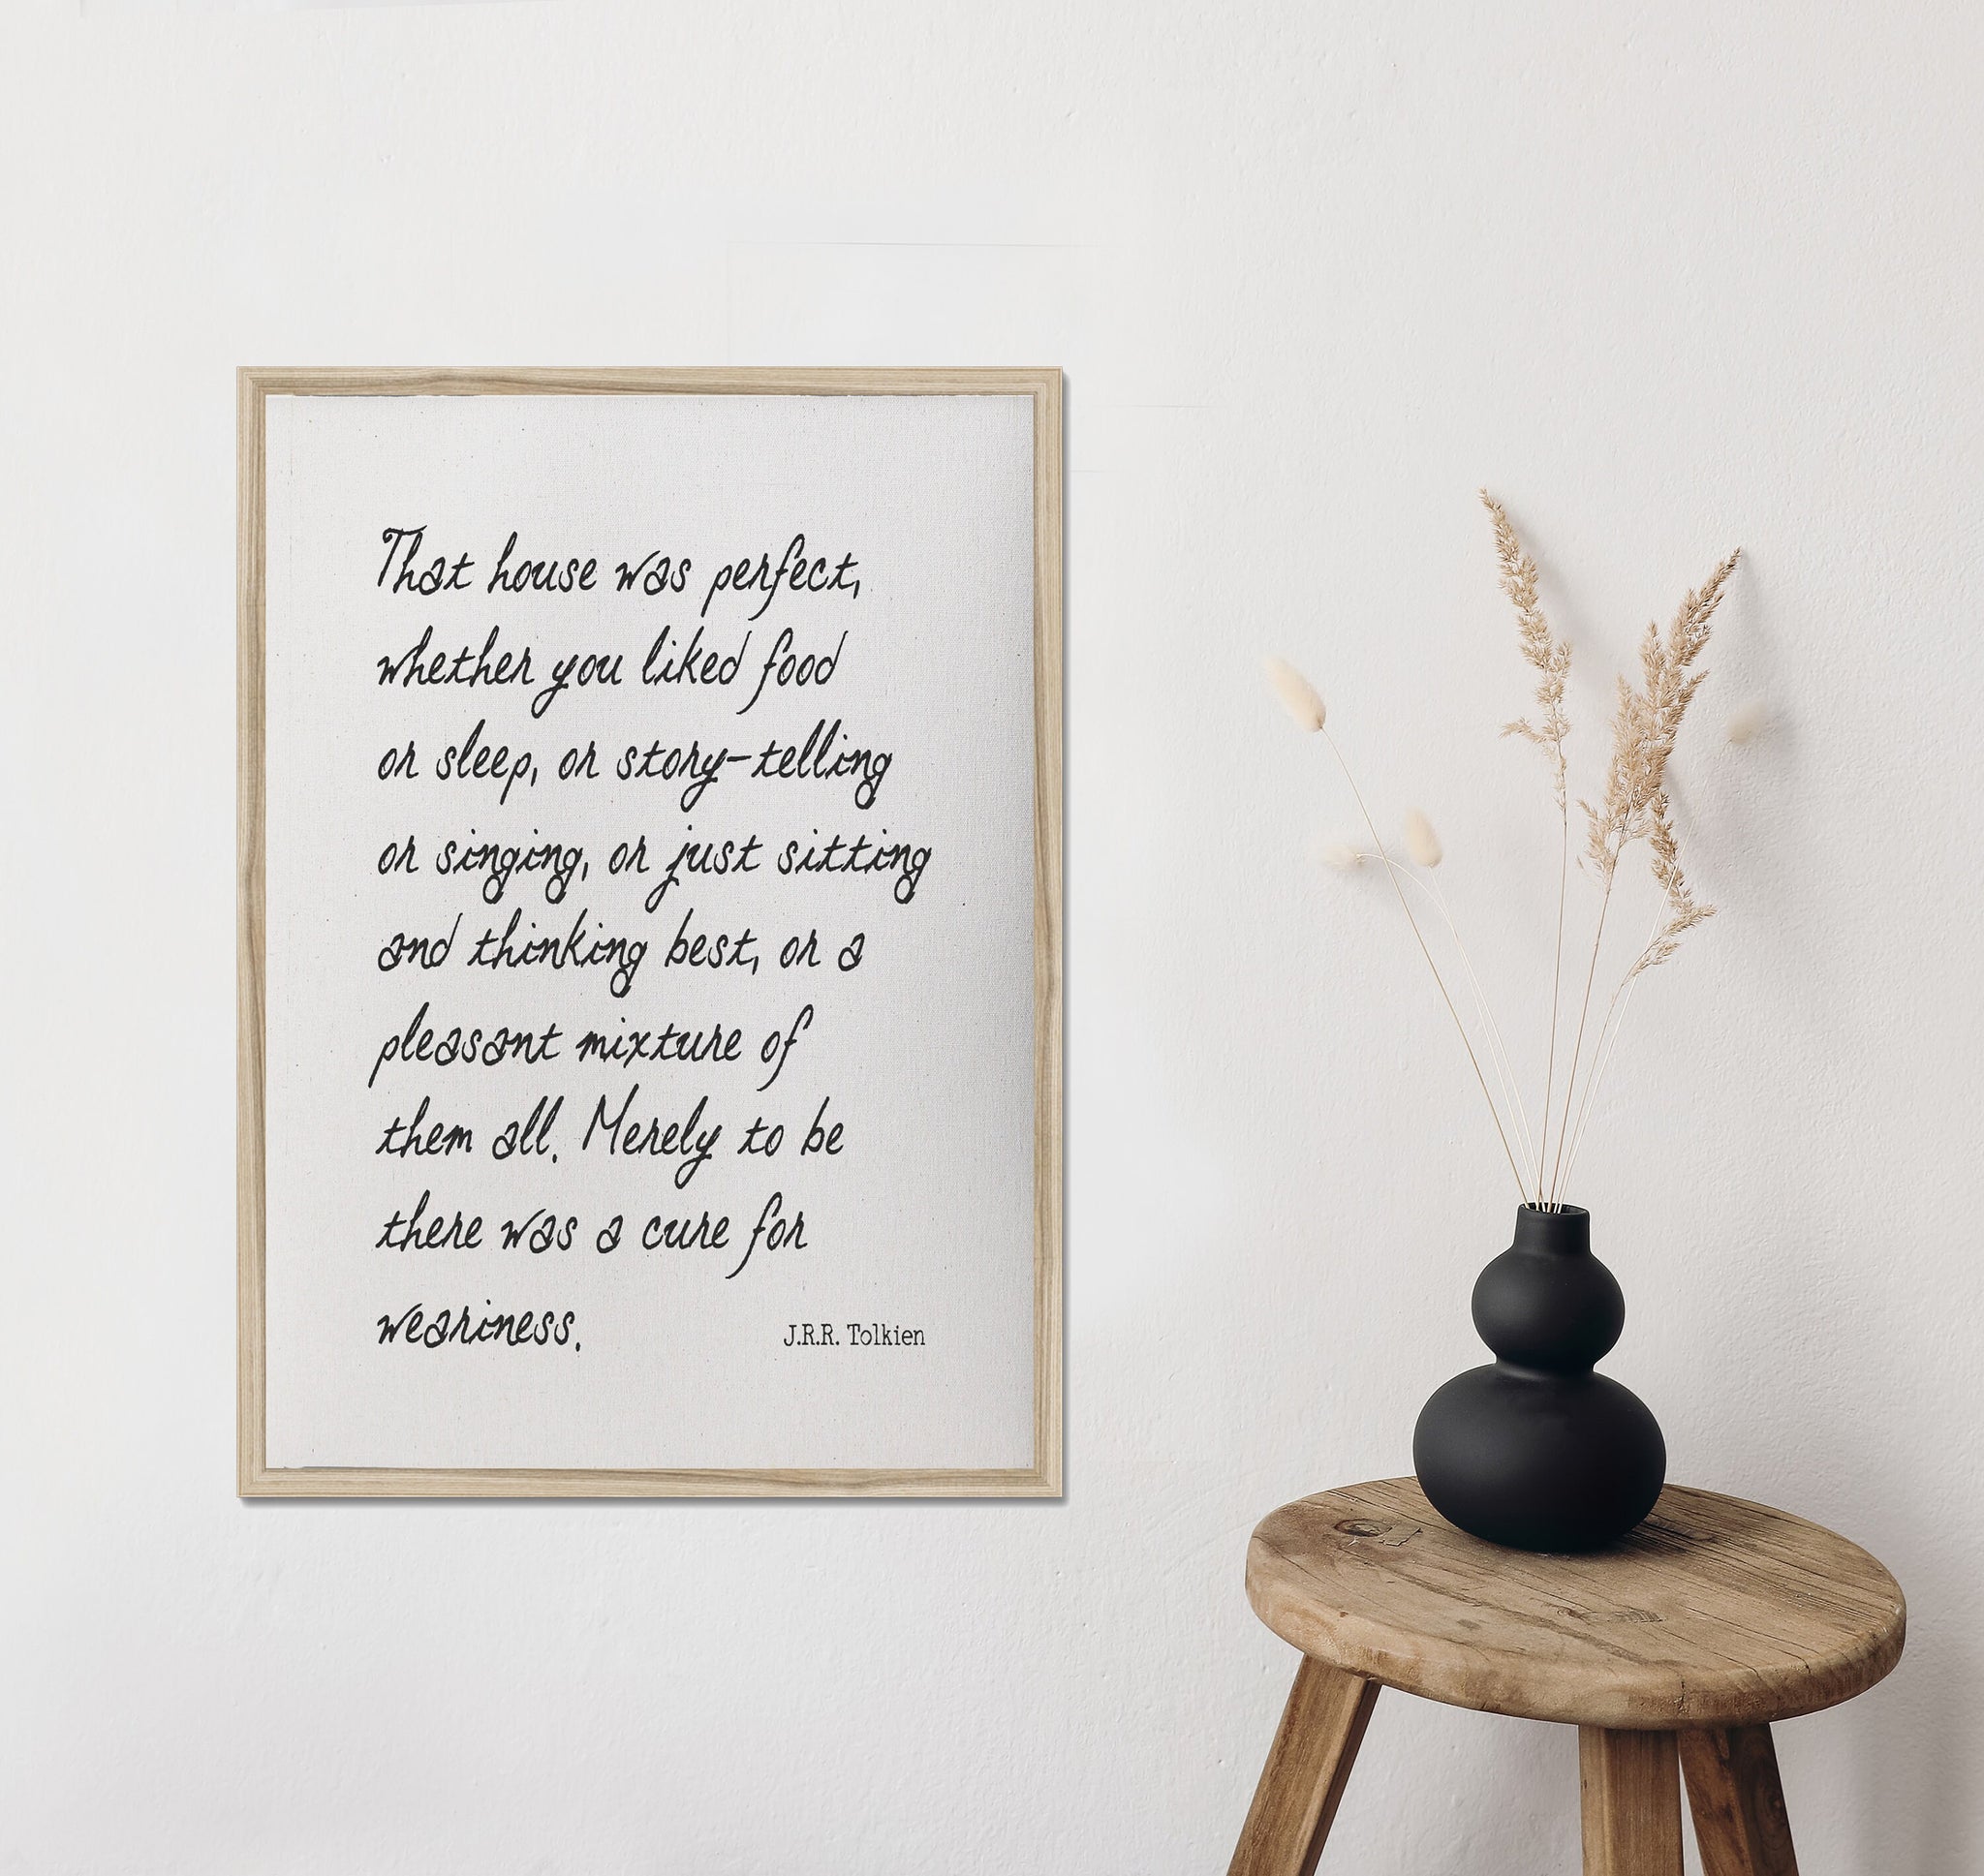 JRR Tolkien quote/The Hobbit quote/house was perfect, whether you liked.../canvas art print/wall art/canvas print/wall decor